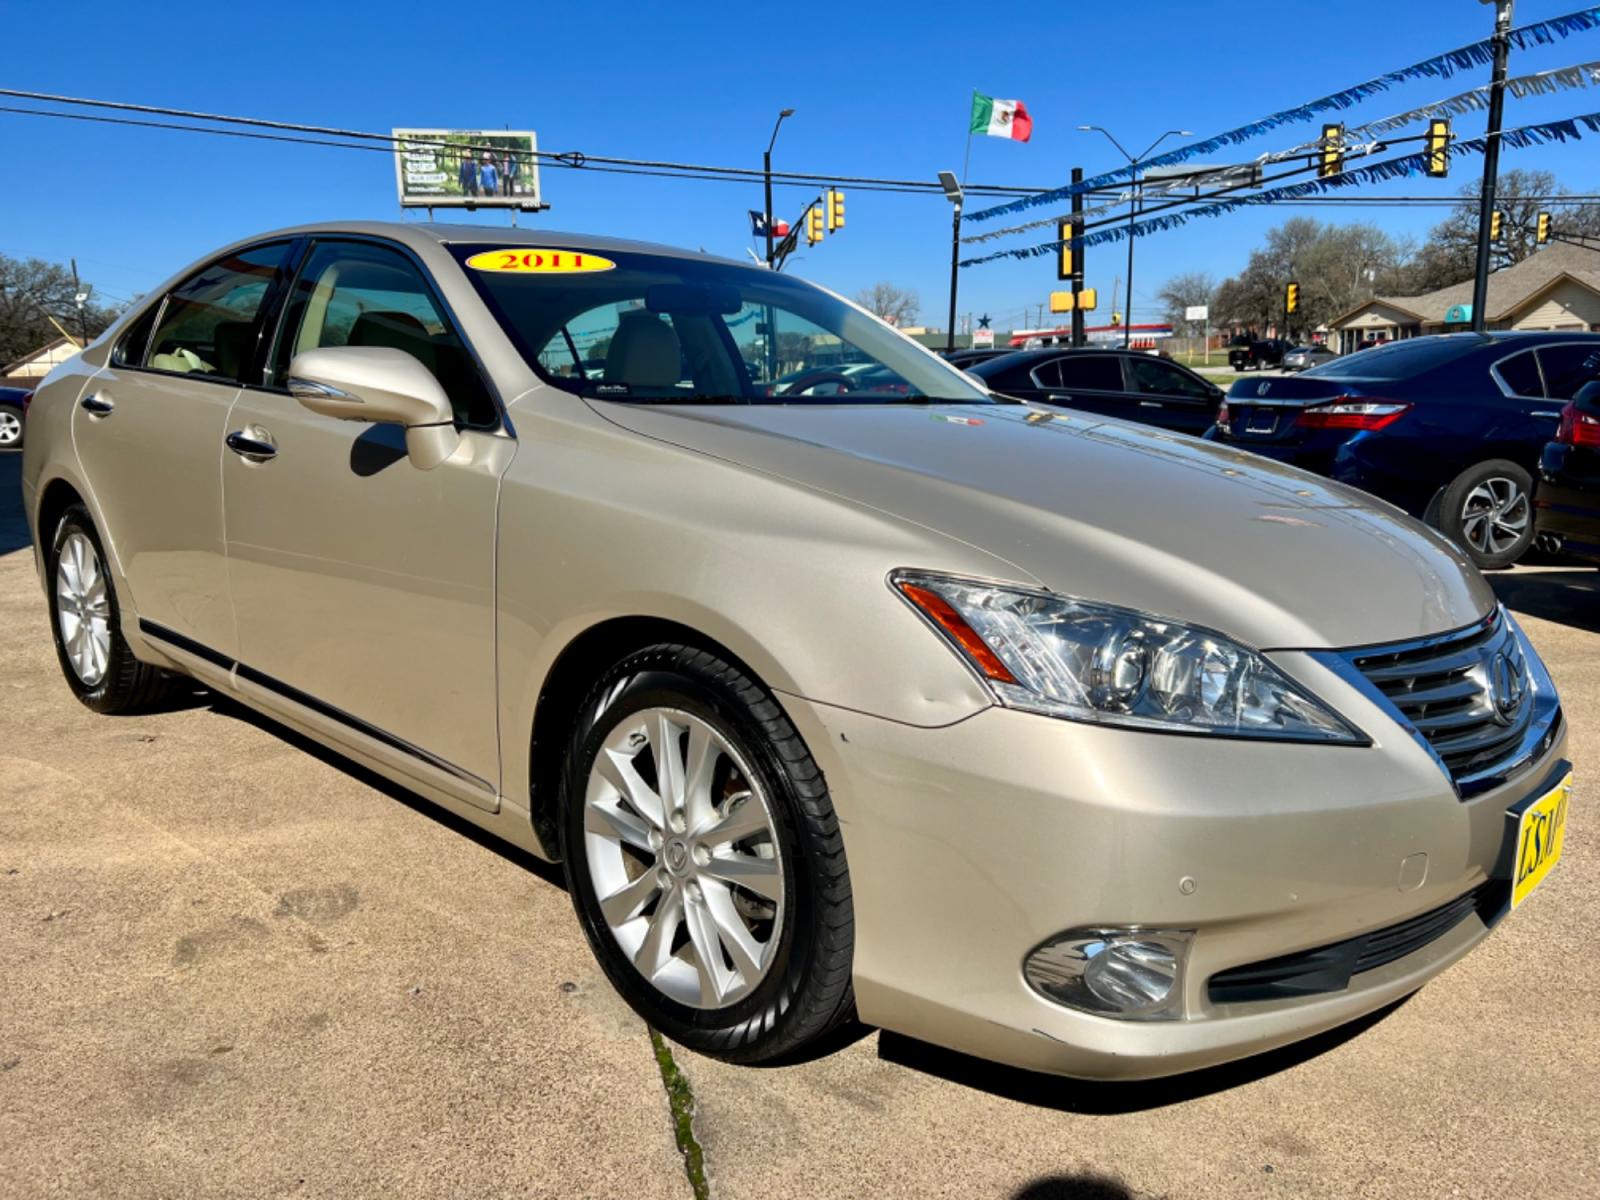 2011 GOLD LEXUS ES 350 (JTHBK1EG9B2) , located at 5900 E. Lancaster Ave., Fort Worth, TX, 76112, (817) 457-5456, 0.000000, 0.000000 - This is a 2011 LEXUS ES 350 4 DOOR SEDAN that is in excellent condition. There are no dents or scratches. The interior is clean with no rips or tears or stains. All power windows, door locks and seats. Ice cold AC for those hot Texas summer days. It is equipped with a CD player, AM/FM radio, AUX por - Photo #8